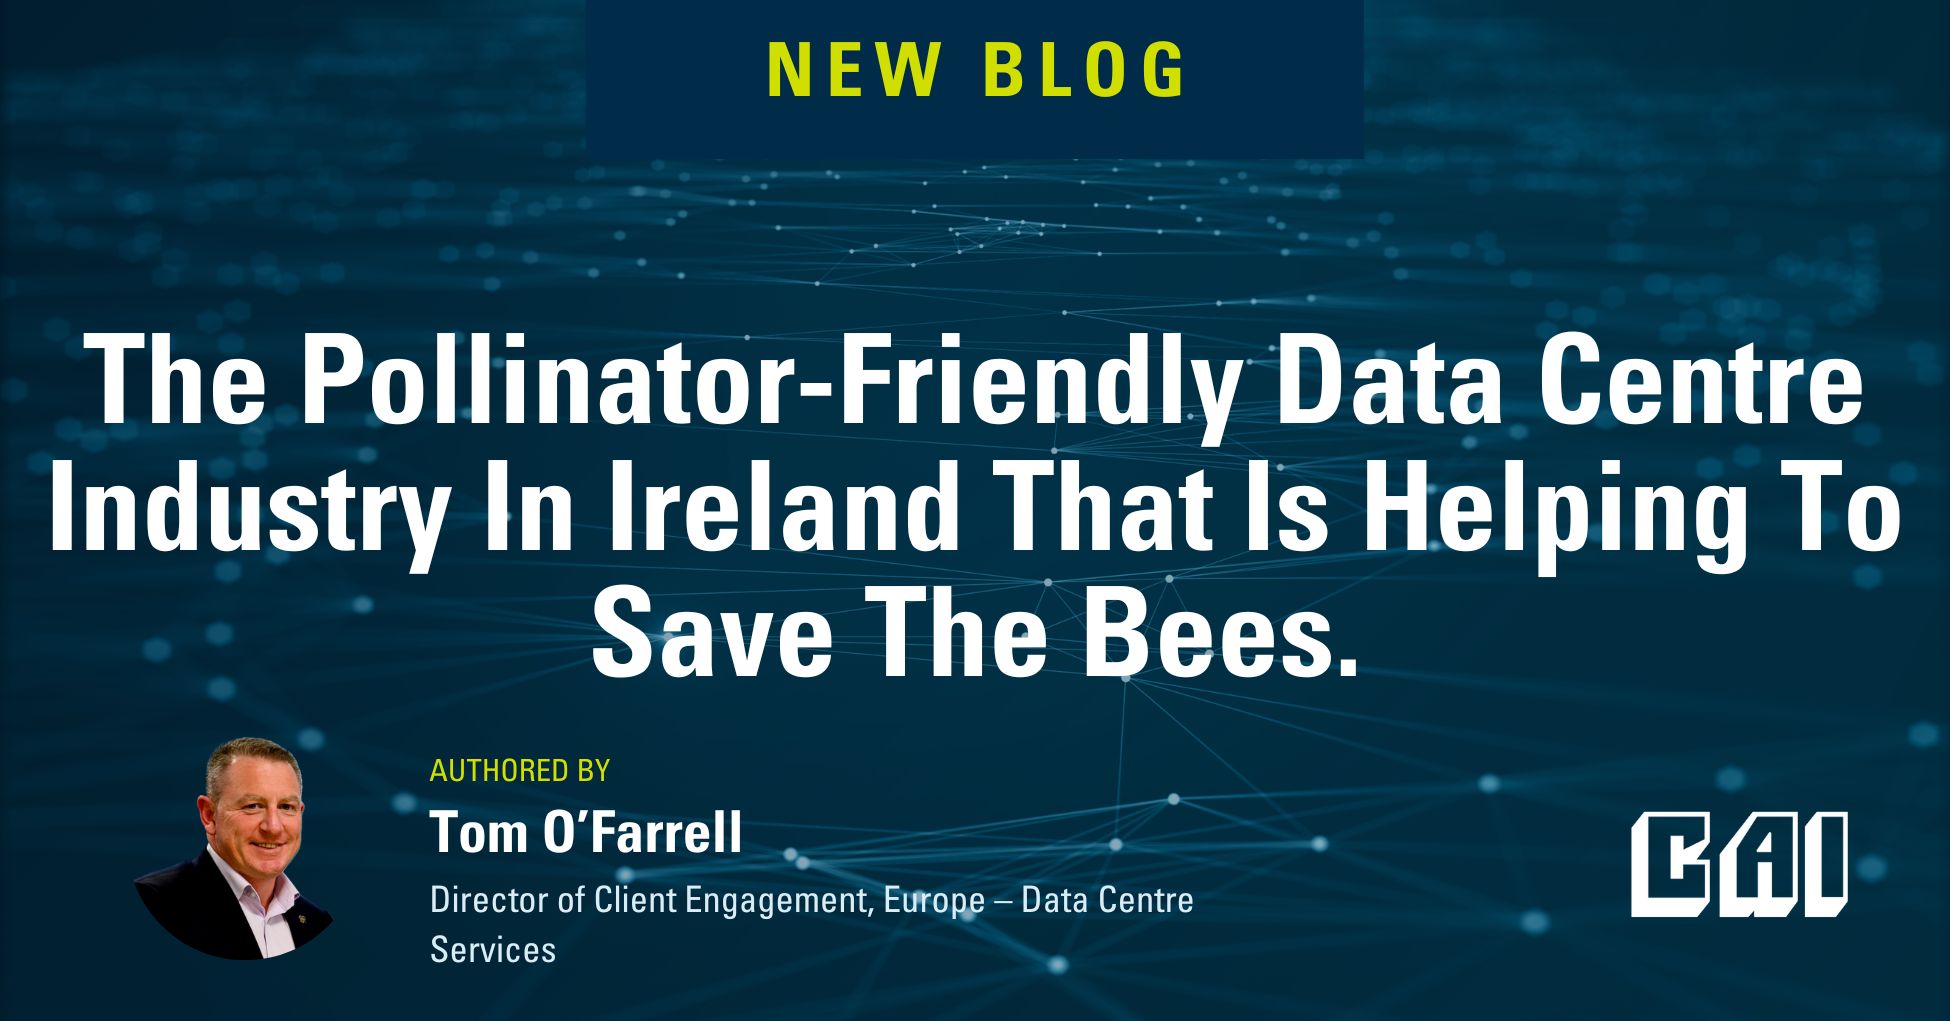 The Pollinator-Friendly Data Centre Industry in Ireland that is helping to save the bees.